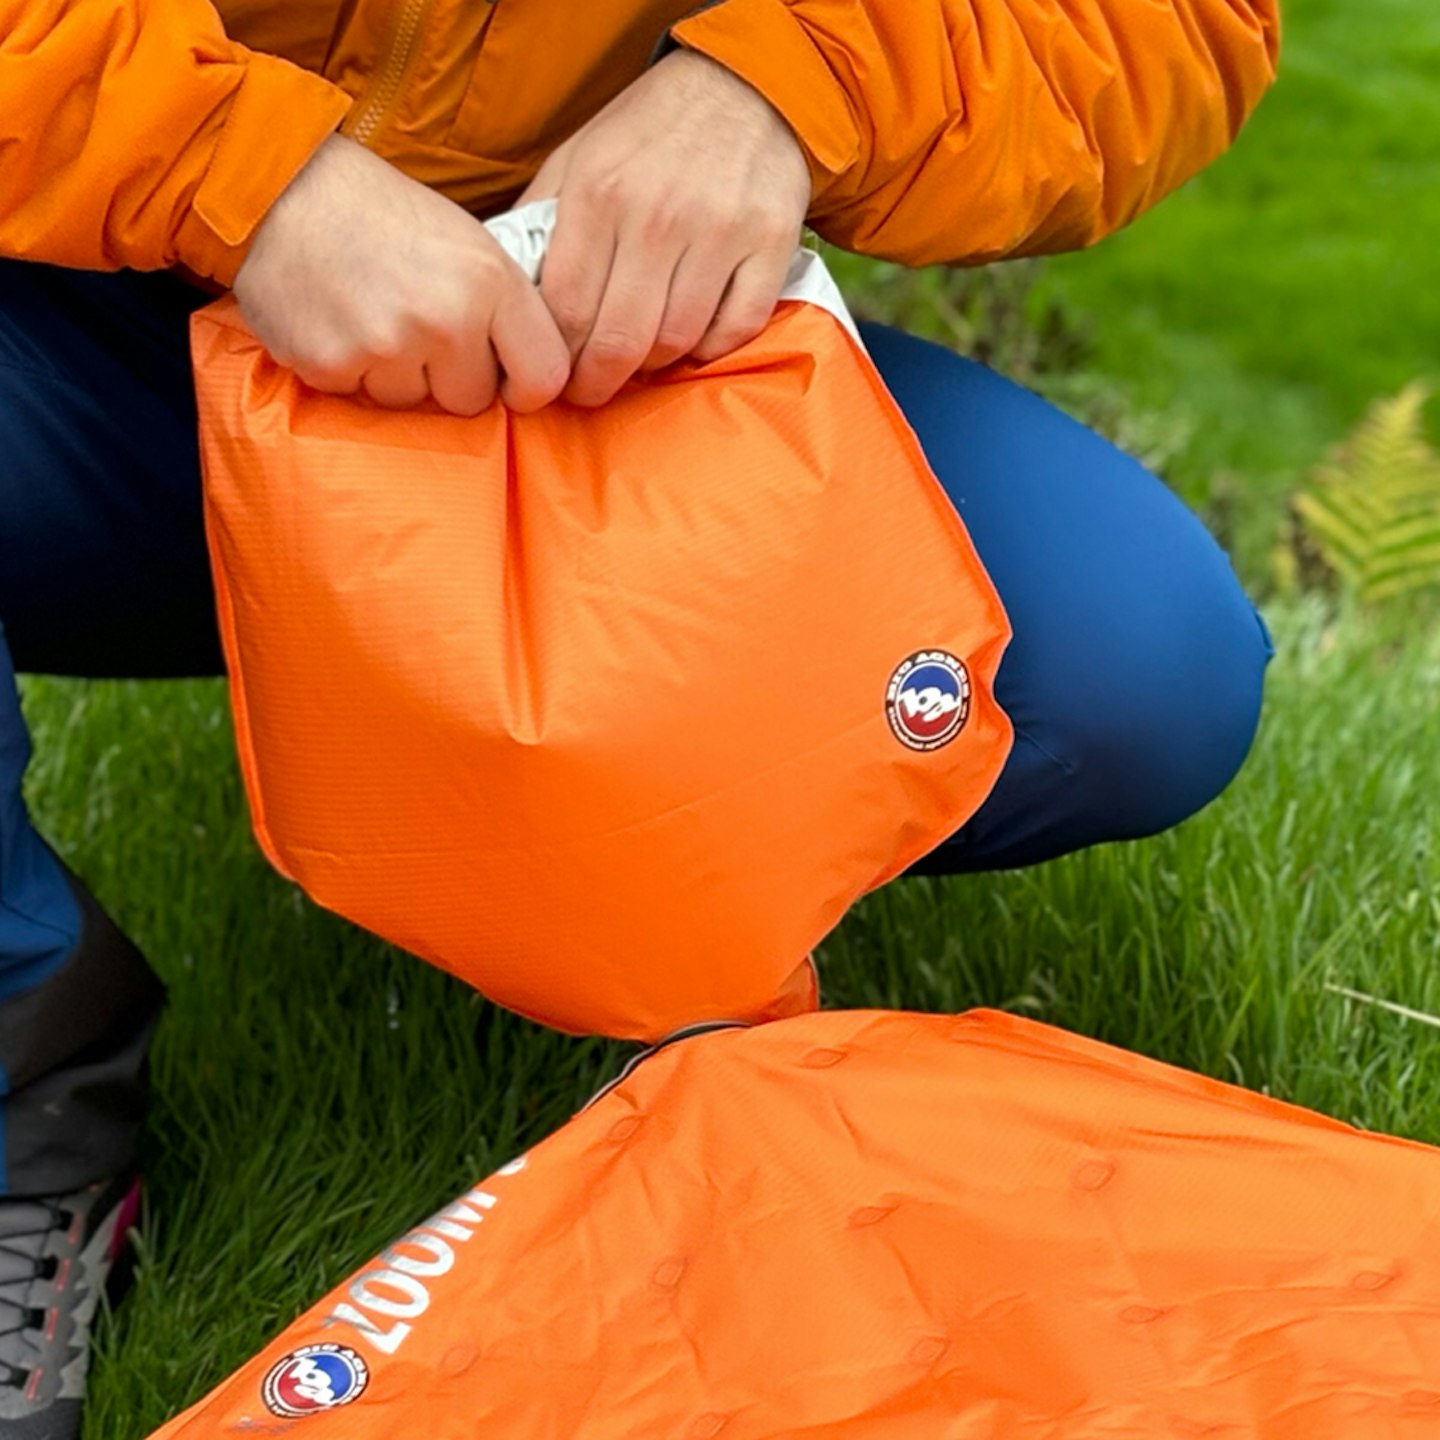 inflation sack for camping mattress